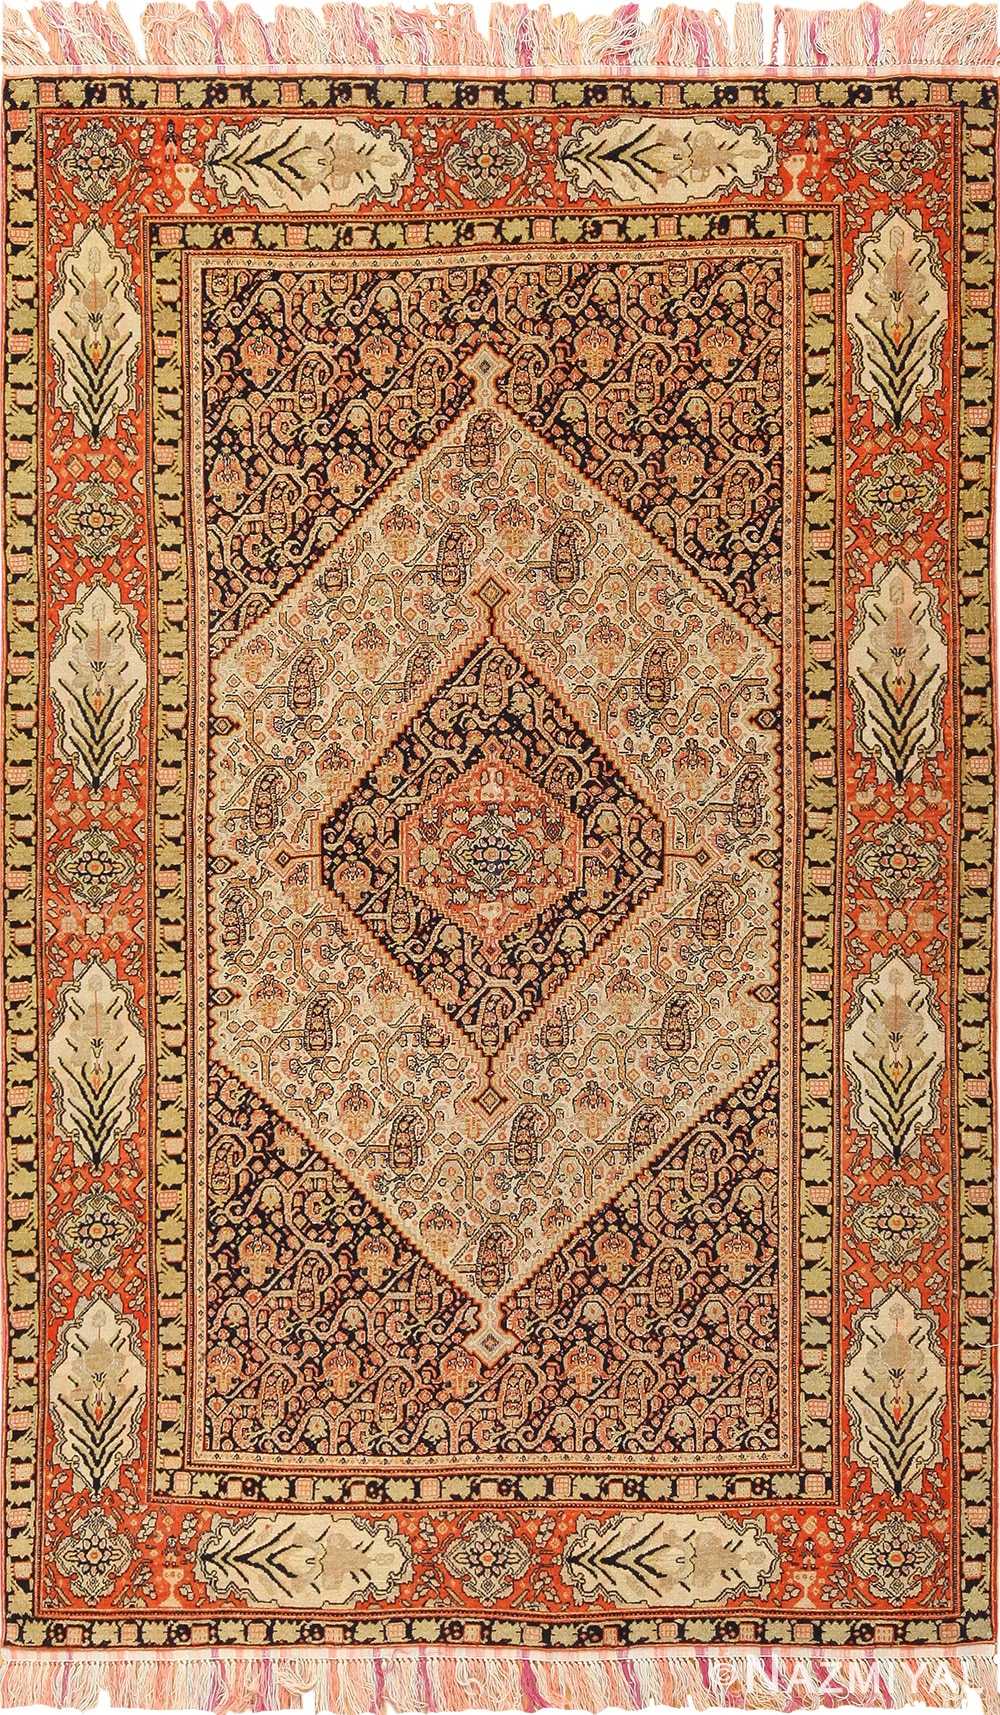 Silk Wool Antique Persian Senneh Rug, How Do You Tell If A Rug Is Silk Or Wool